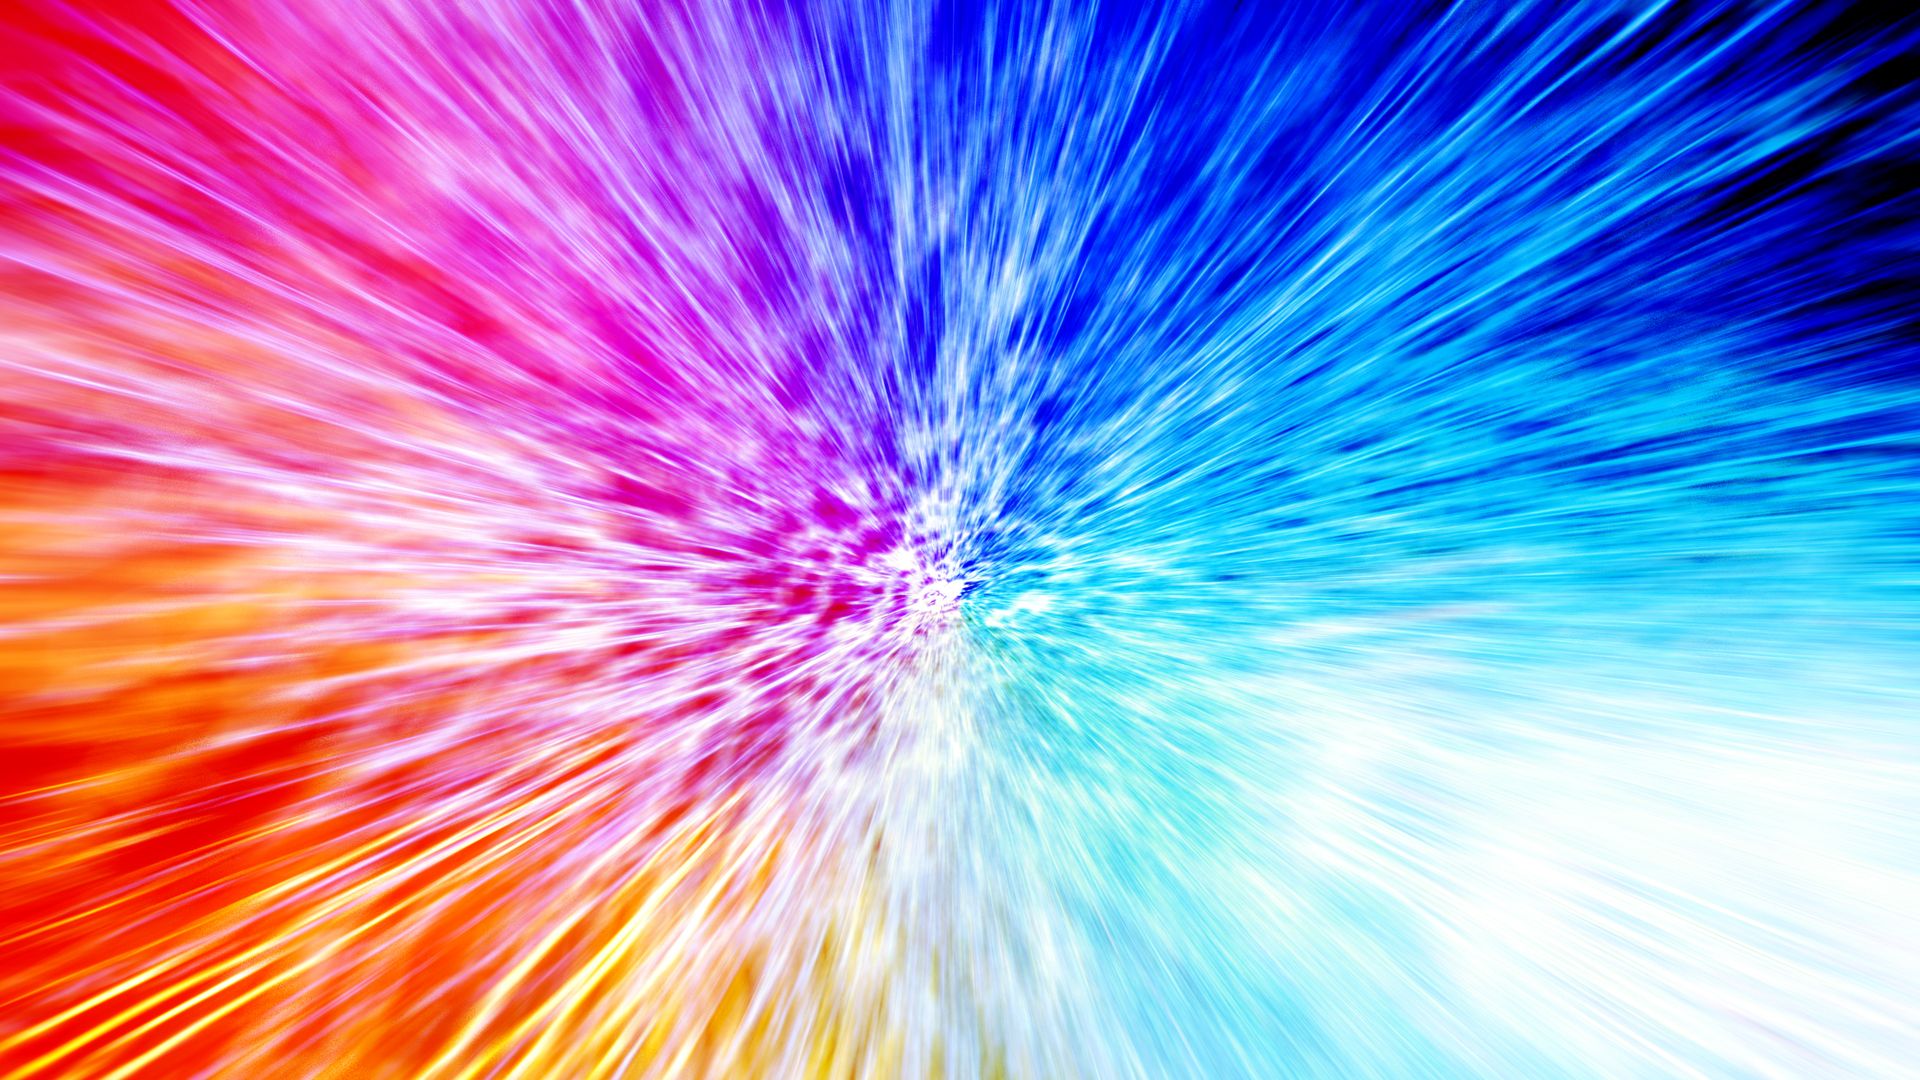 850 Colors HD Wallpapers Backgrounds - Wallpaper Abyss